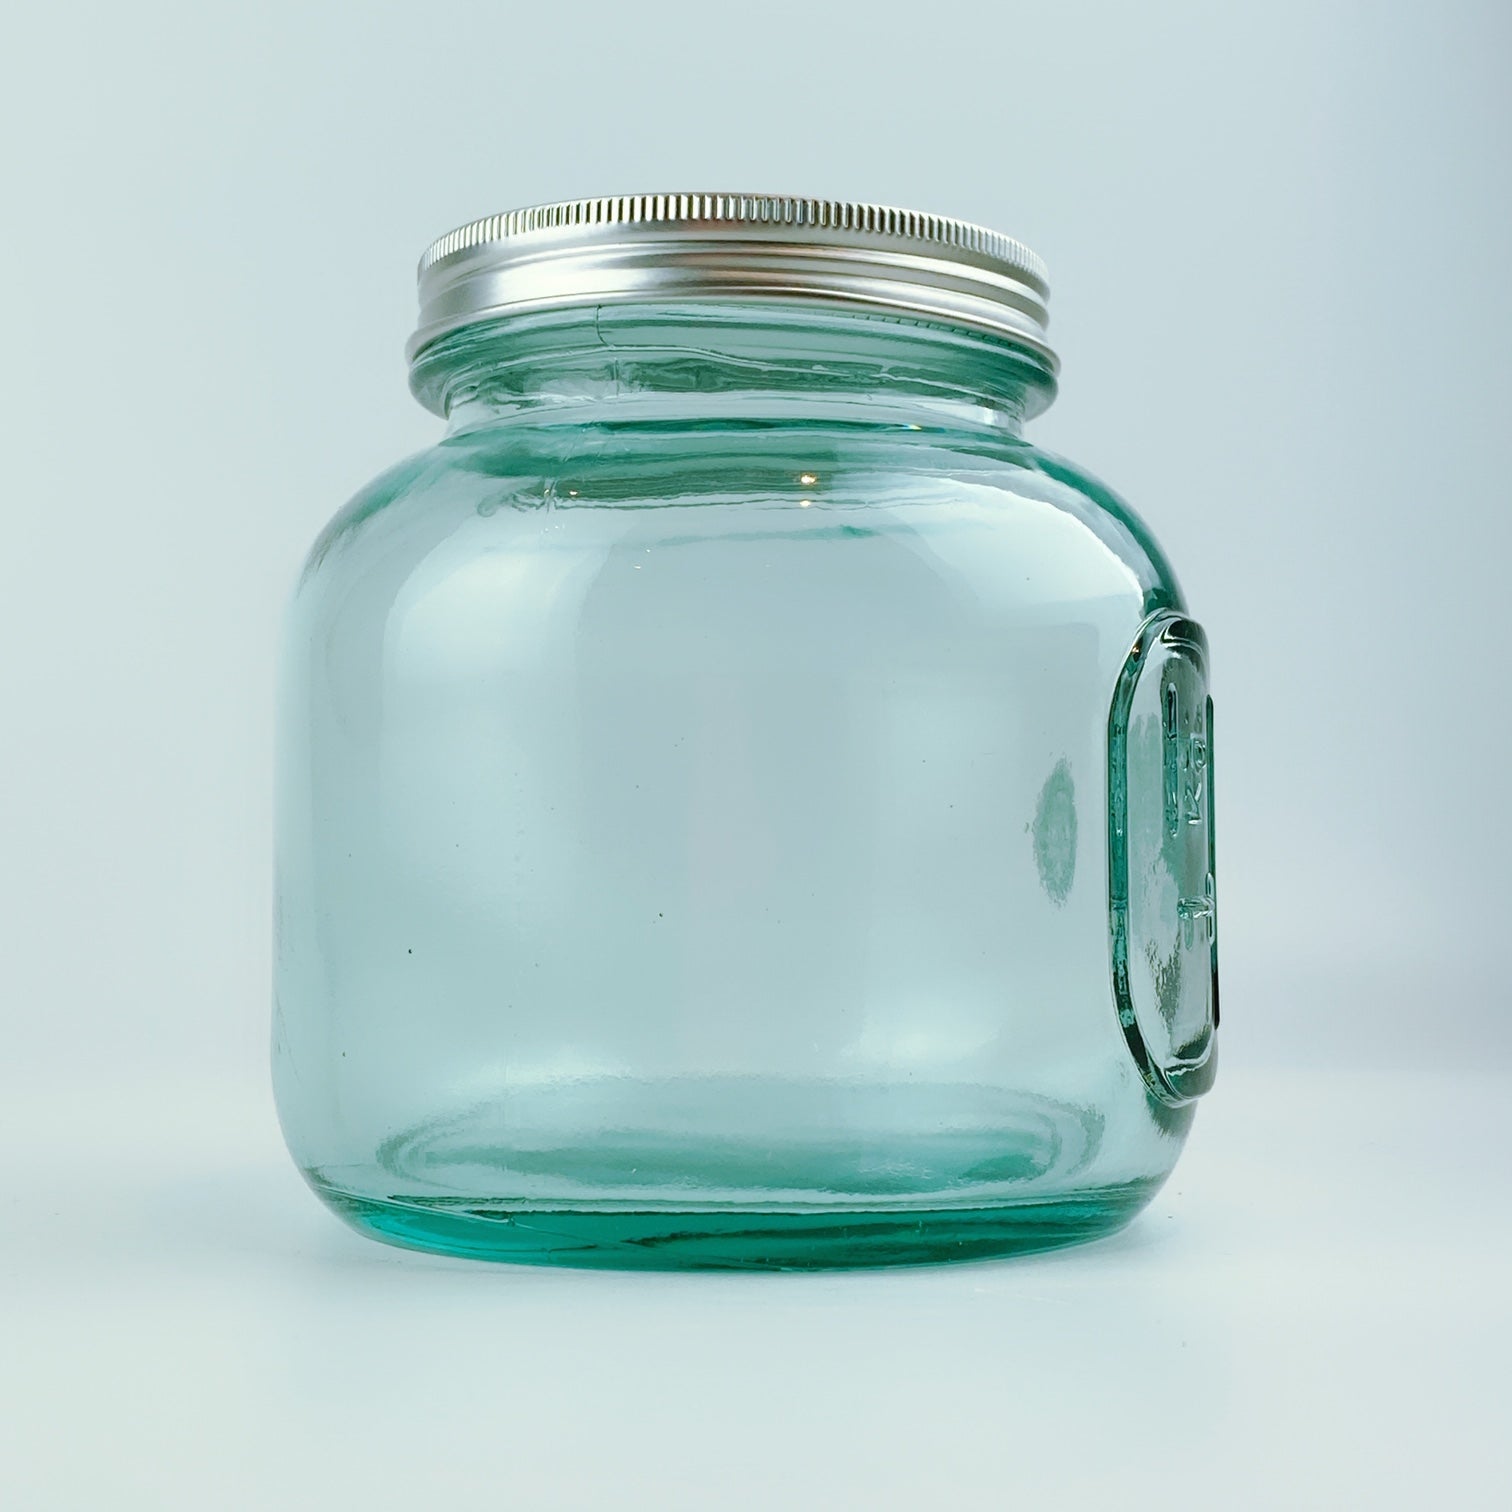 Small Authentic Glass Jar W/ Spigot 100% Recycled Glass From Spain